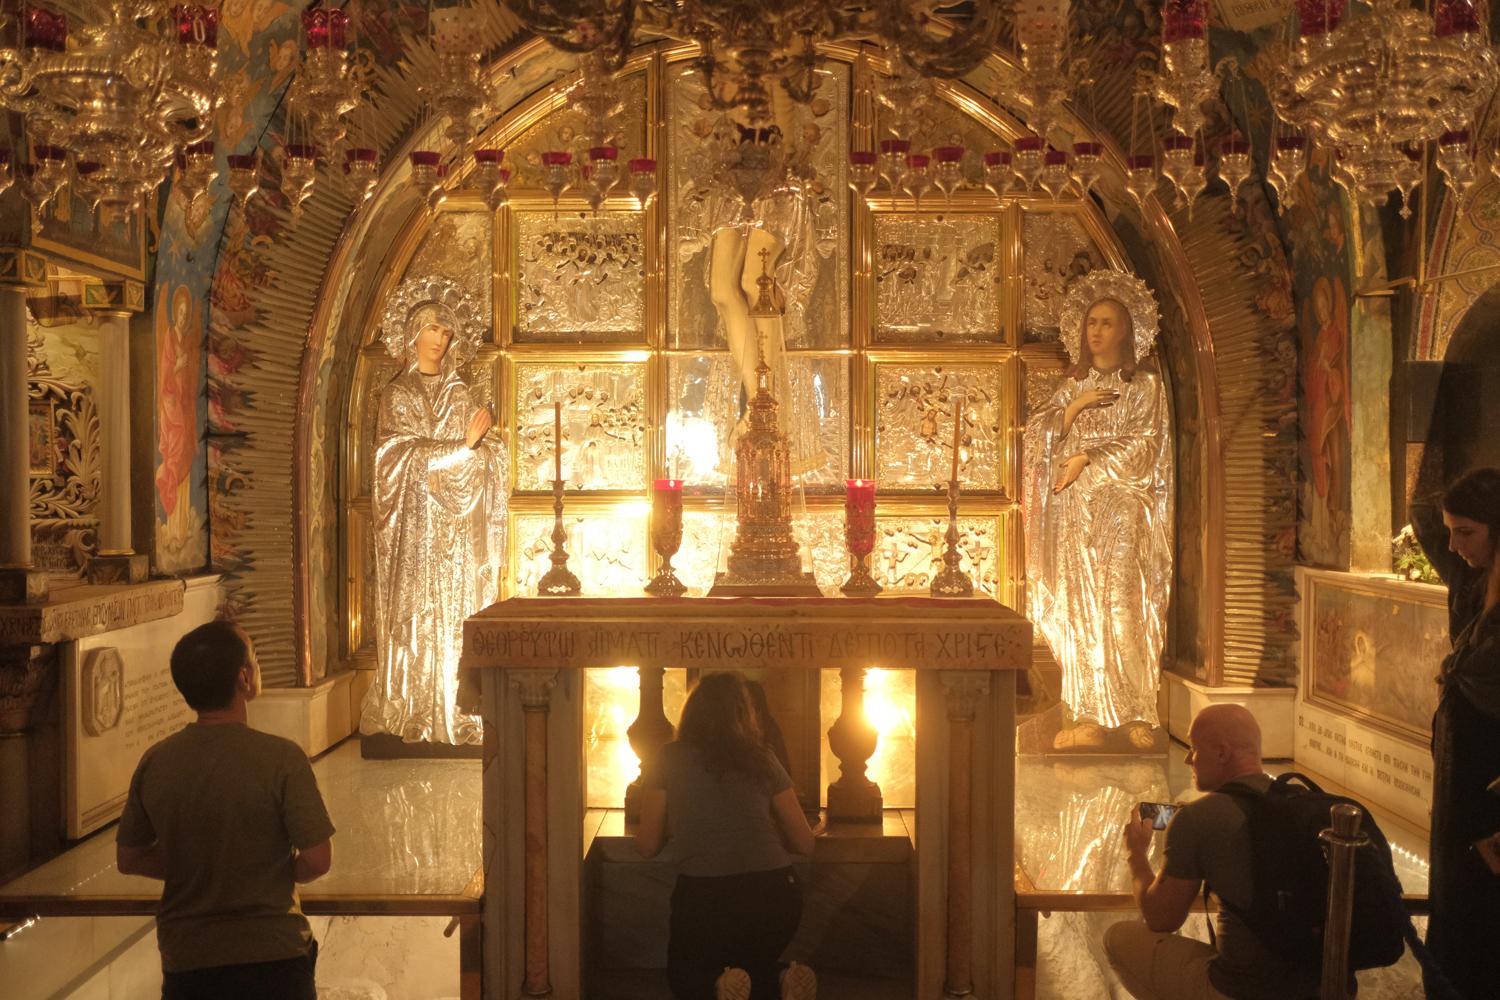 Church of the Holy Sepulchre - Altar of the Crucifixion